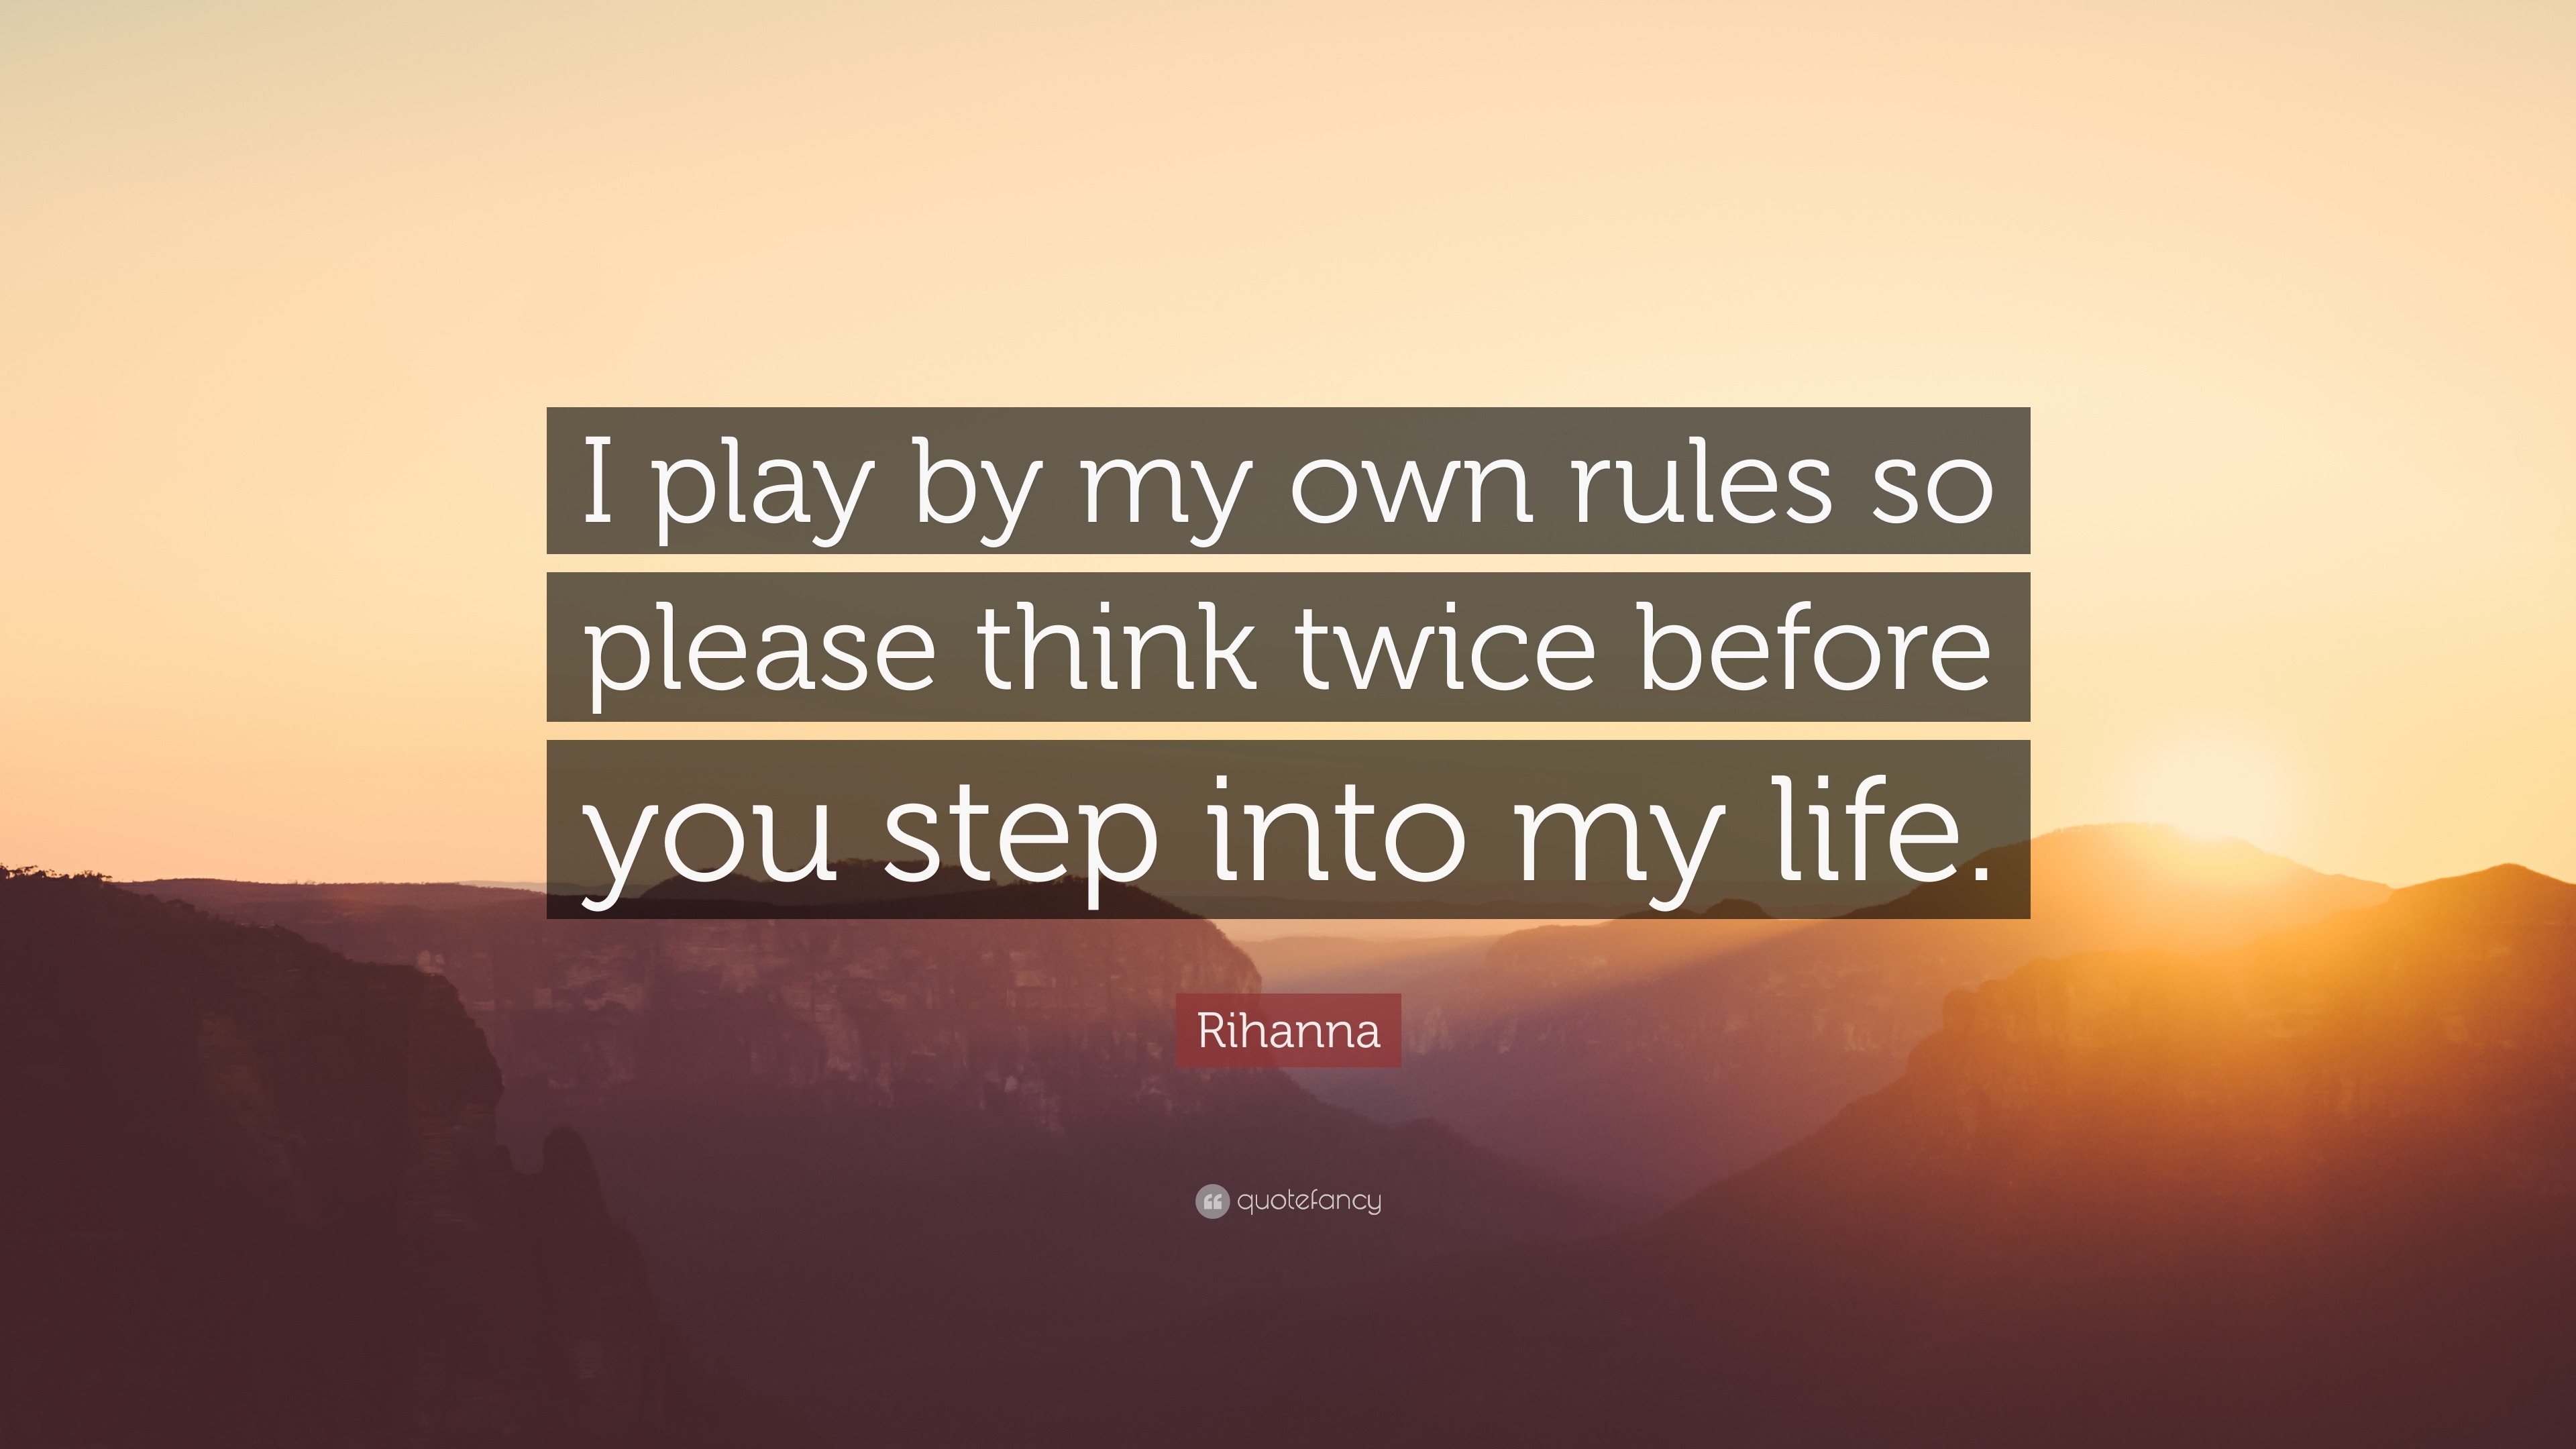 Rihanna Quote “I play by my own rules so please think twice before you